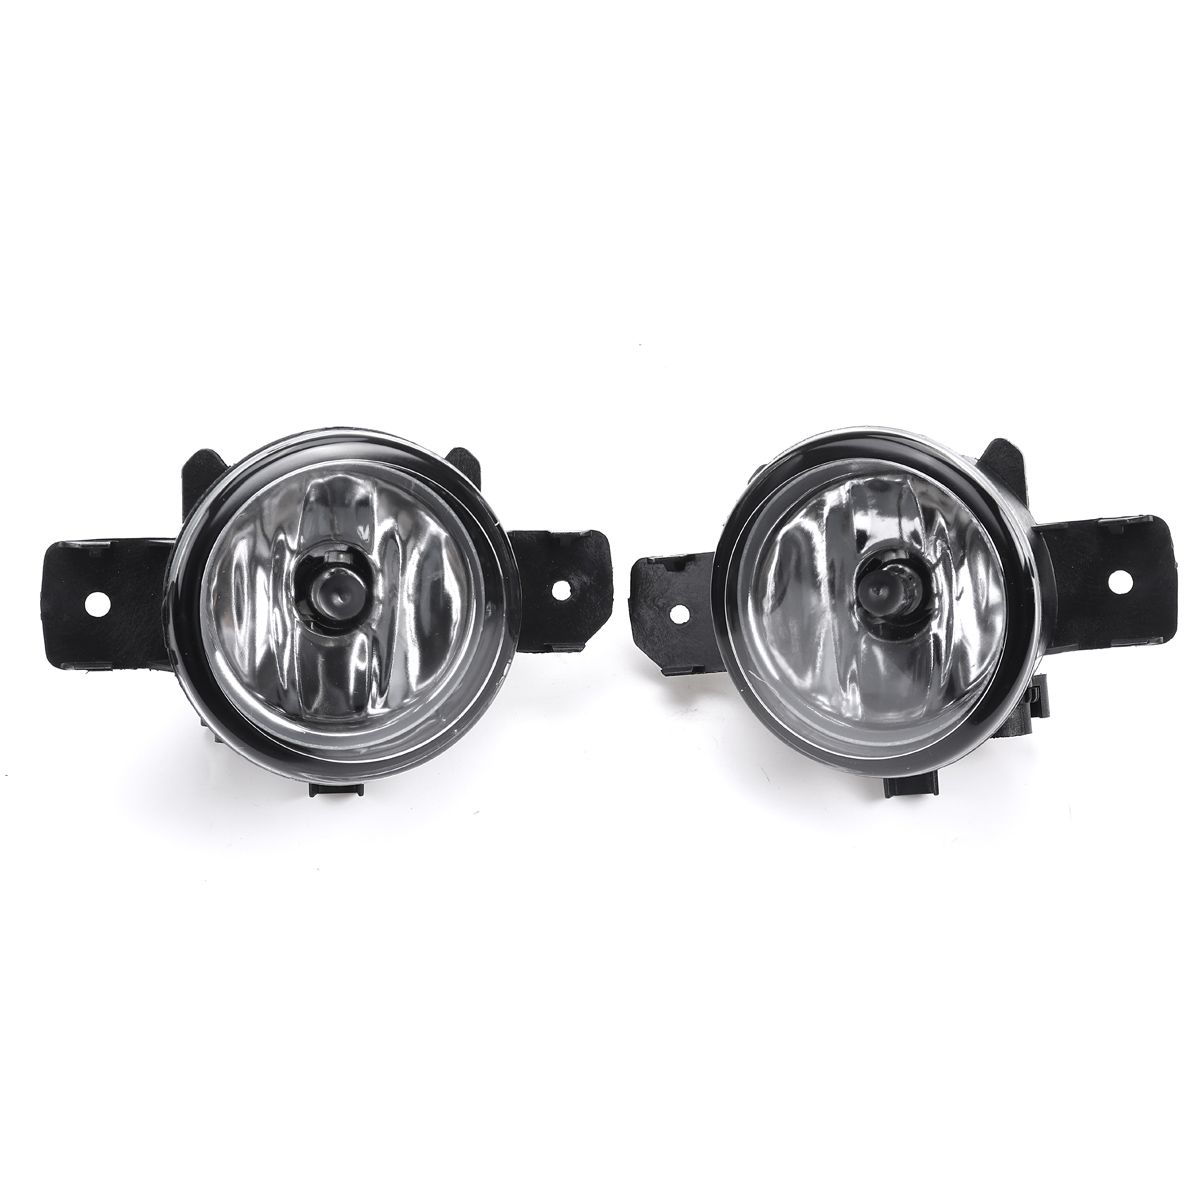 2Pcs-Car-Front-Bumper-Tail-Lights-Fog-Lamps-Bulbs-Left-Right-With-H11-Bulbs-183630665357-For-Nissan--1648737